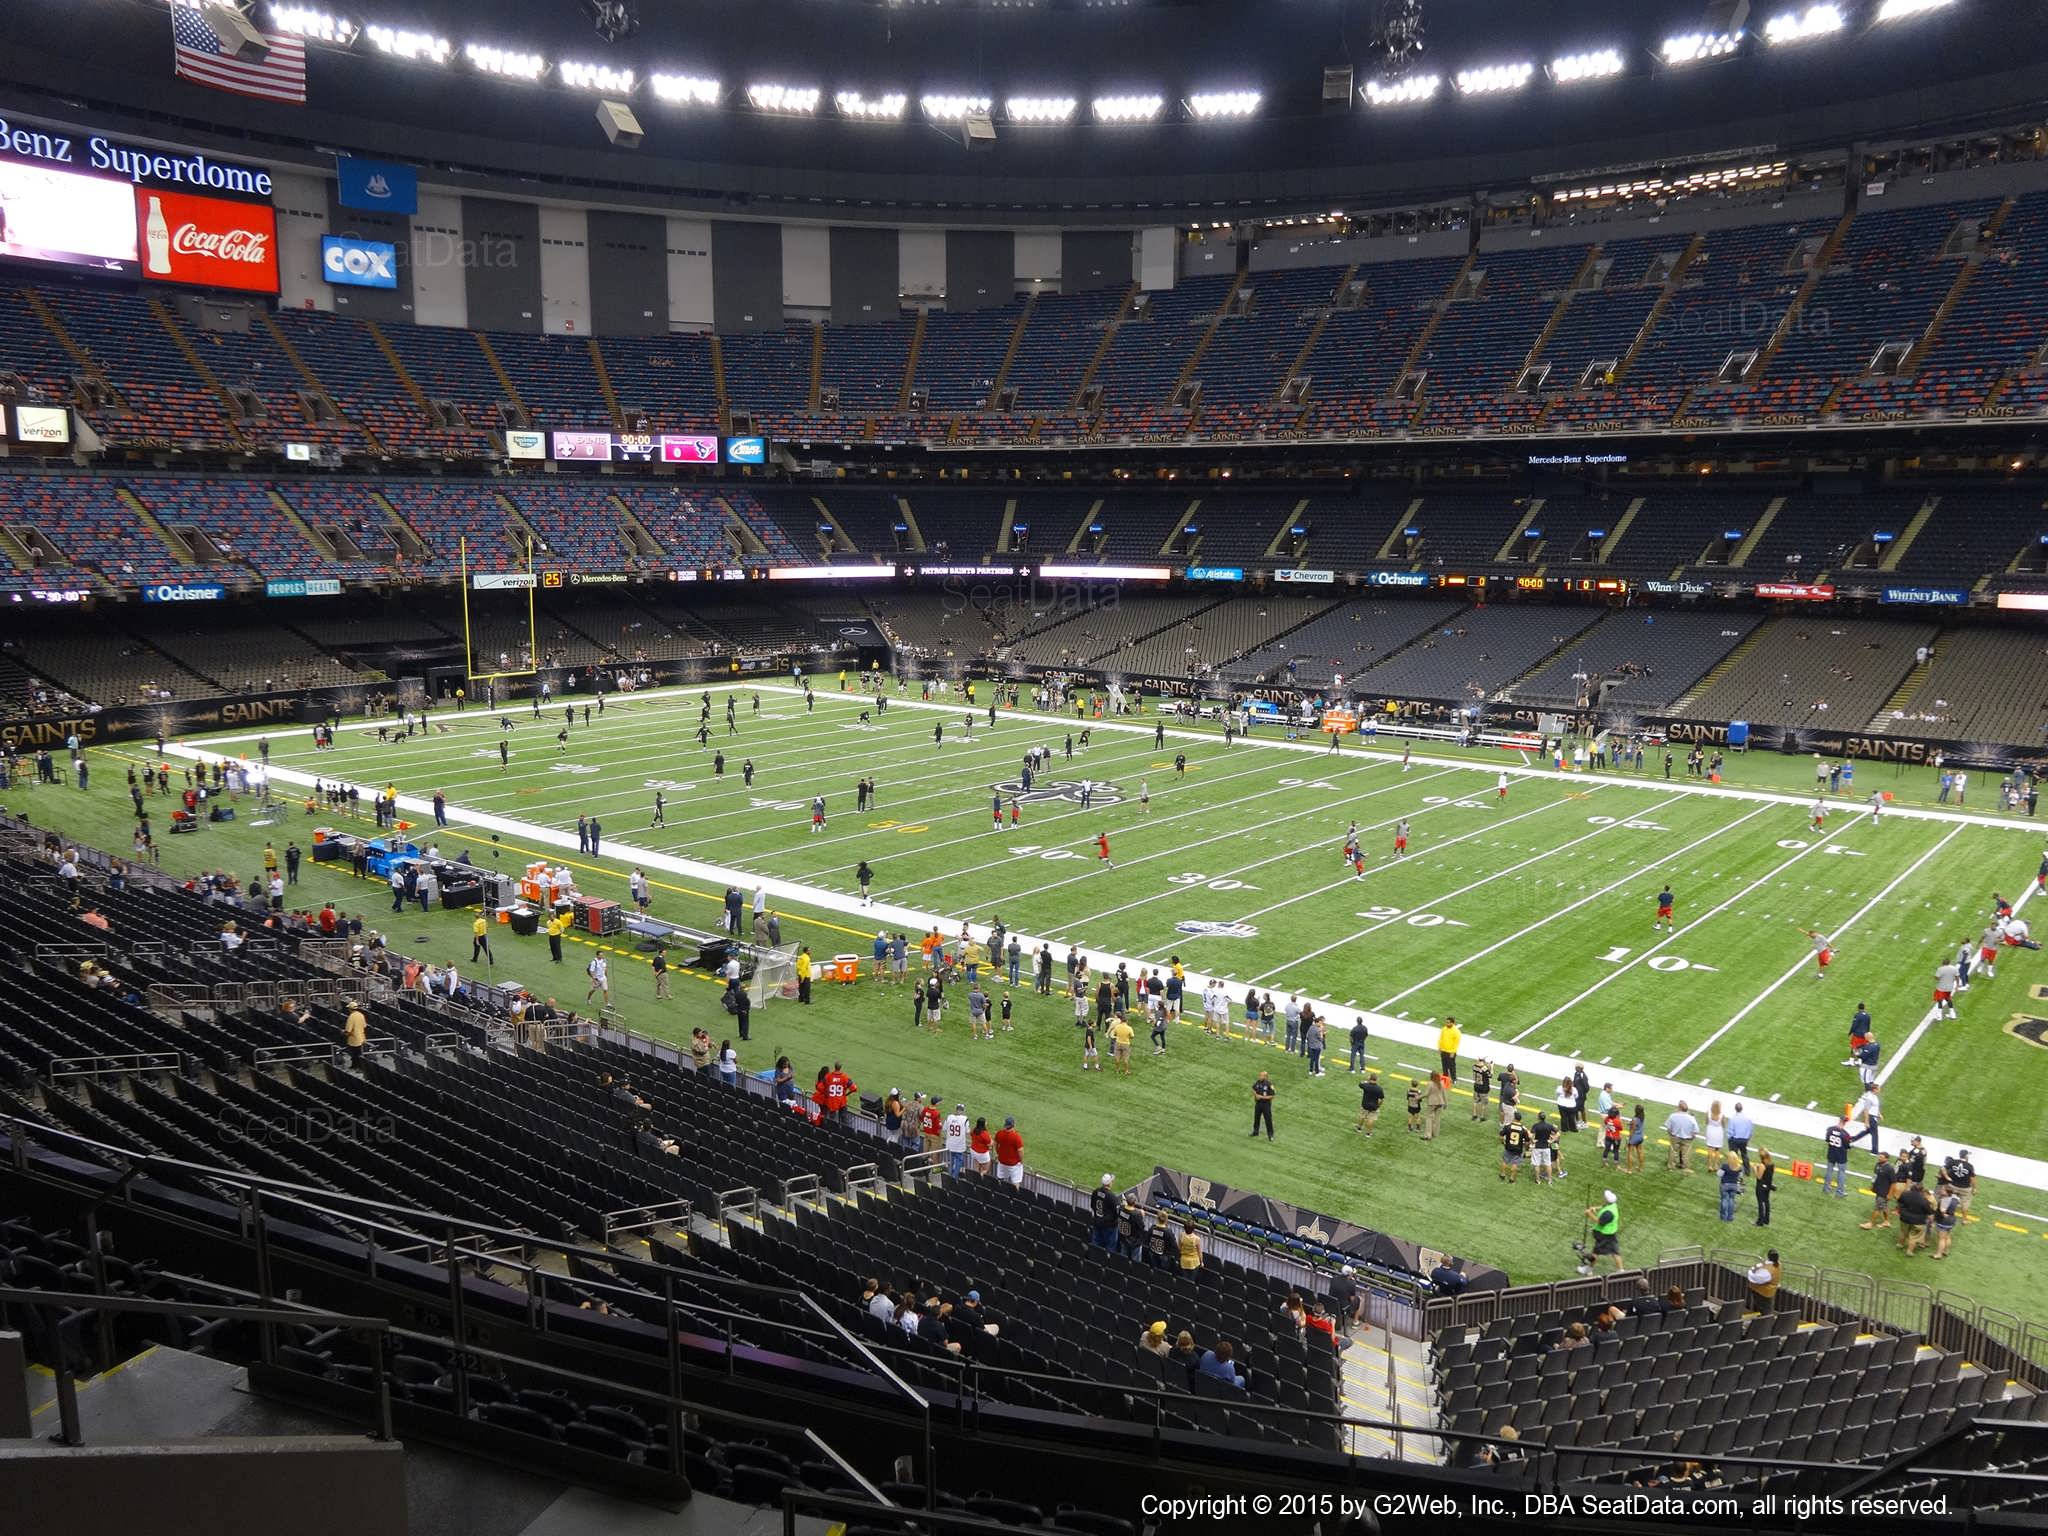 Seat view from section 307 at the Mercedes-Benz Superdome, home of the New Orleans Saints